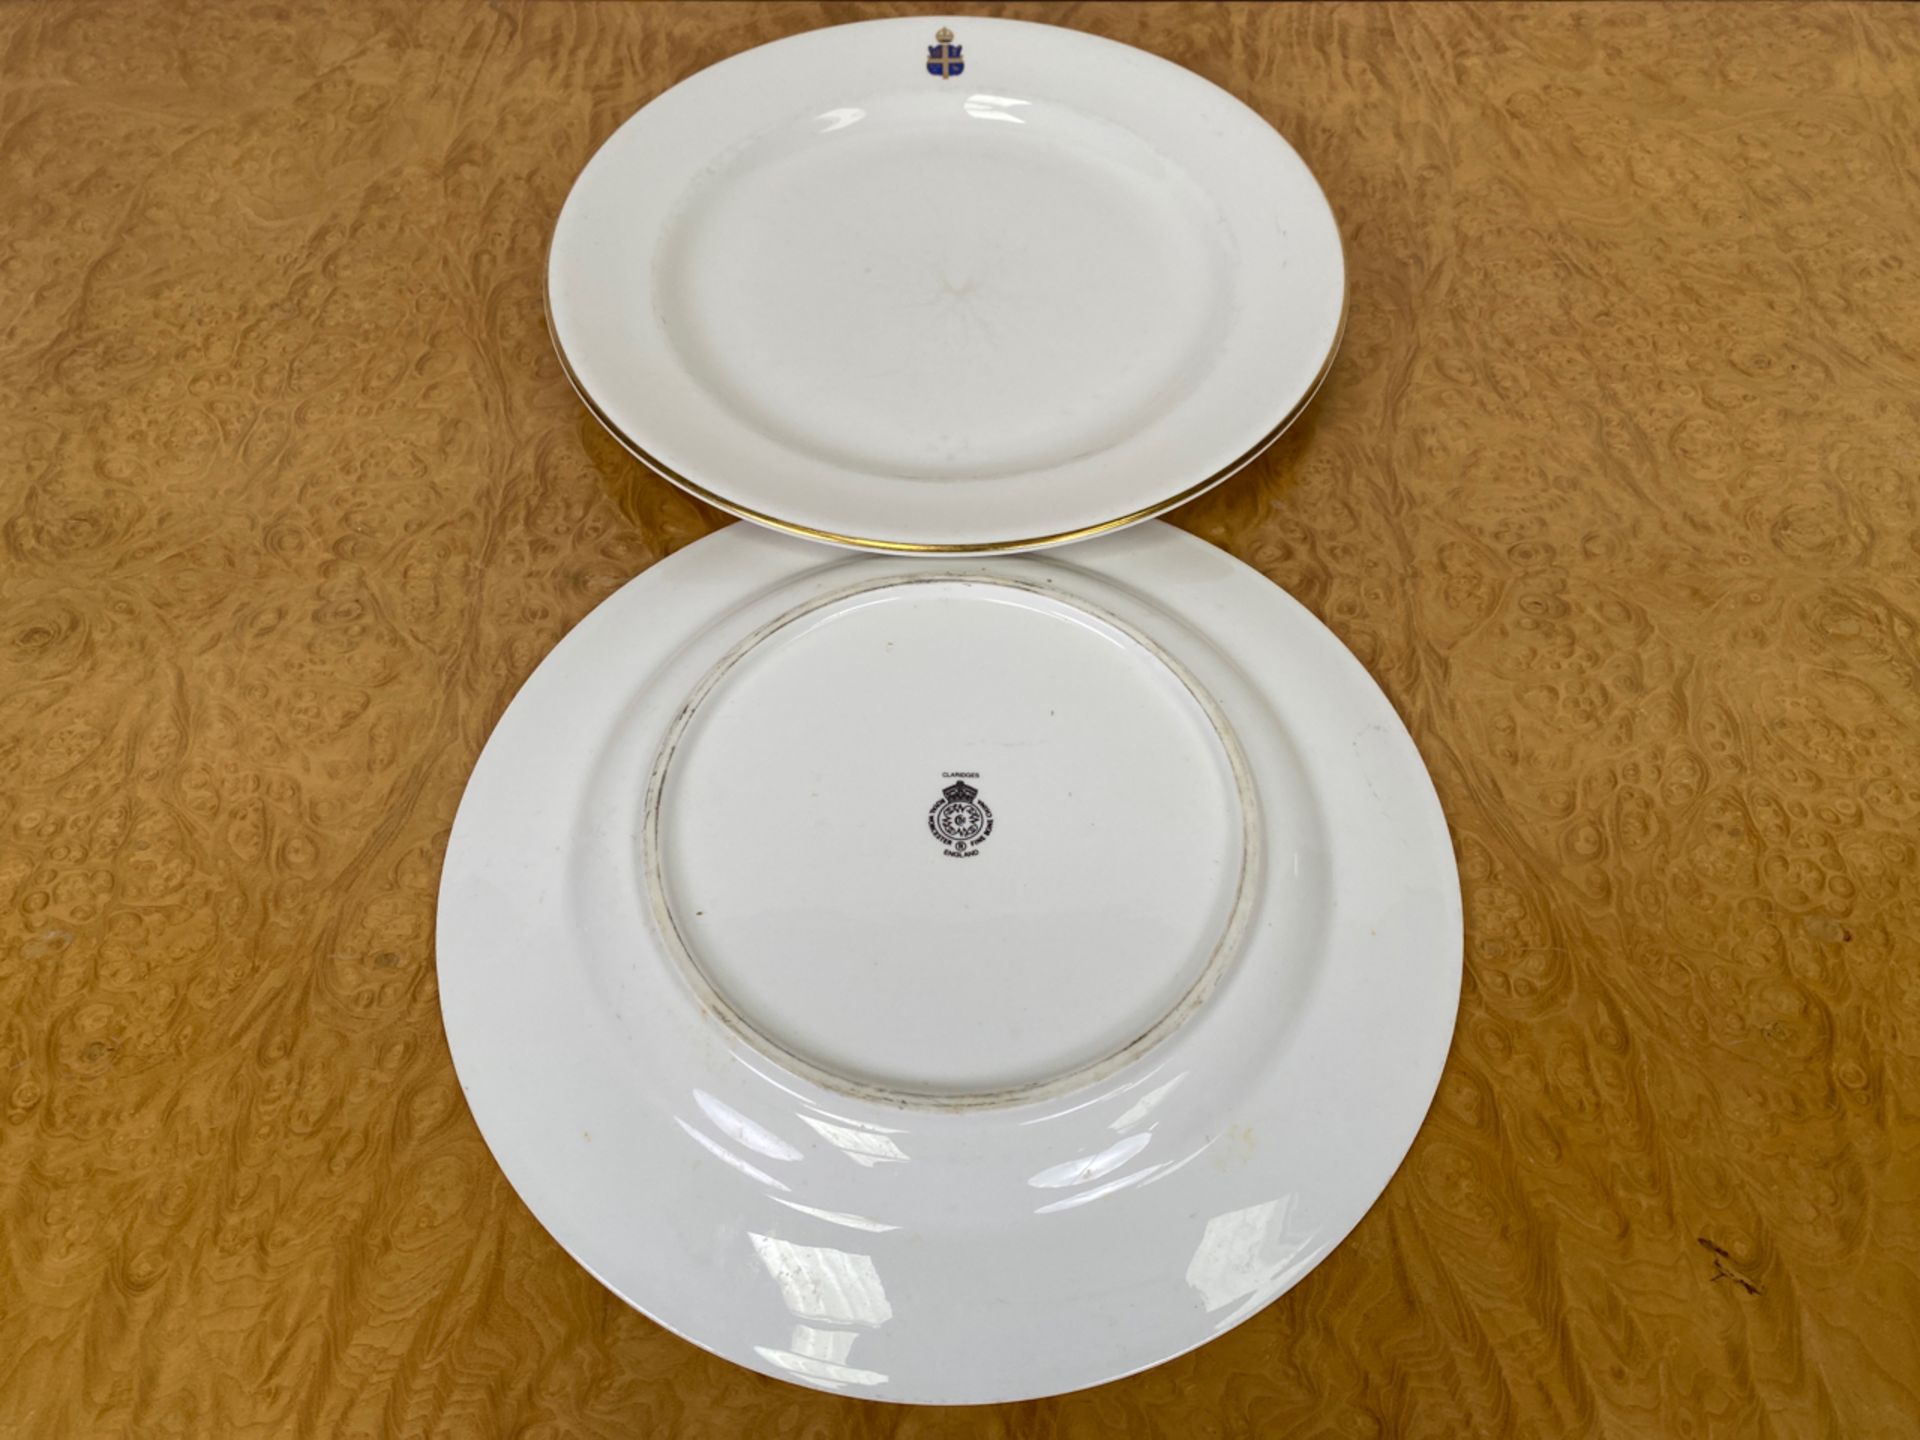 Set of Crested Crockery for Claridge's by Chommette 1884 - Image 21 of 31